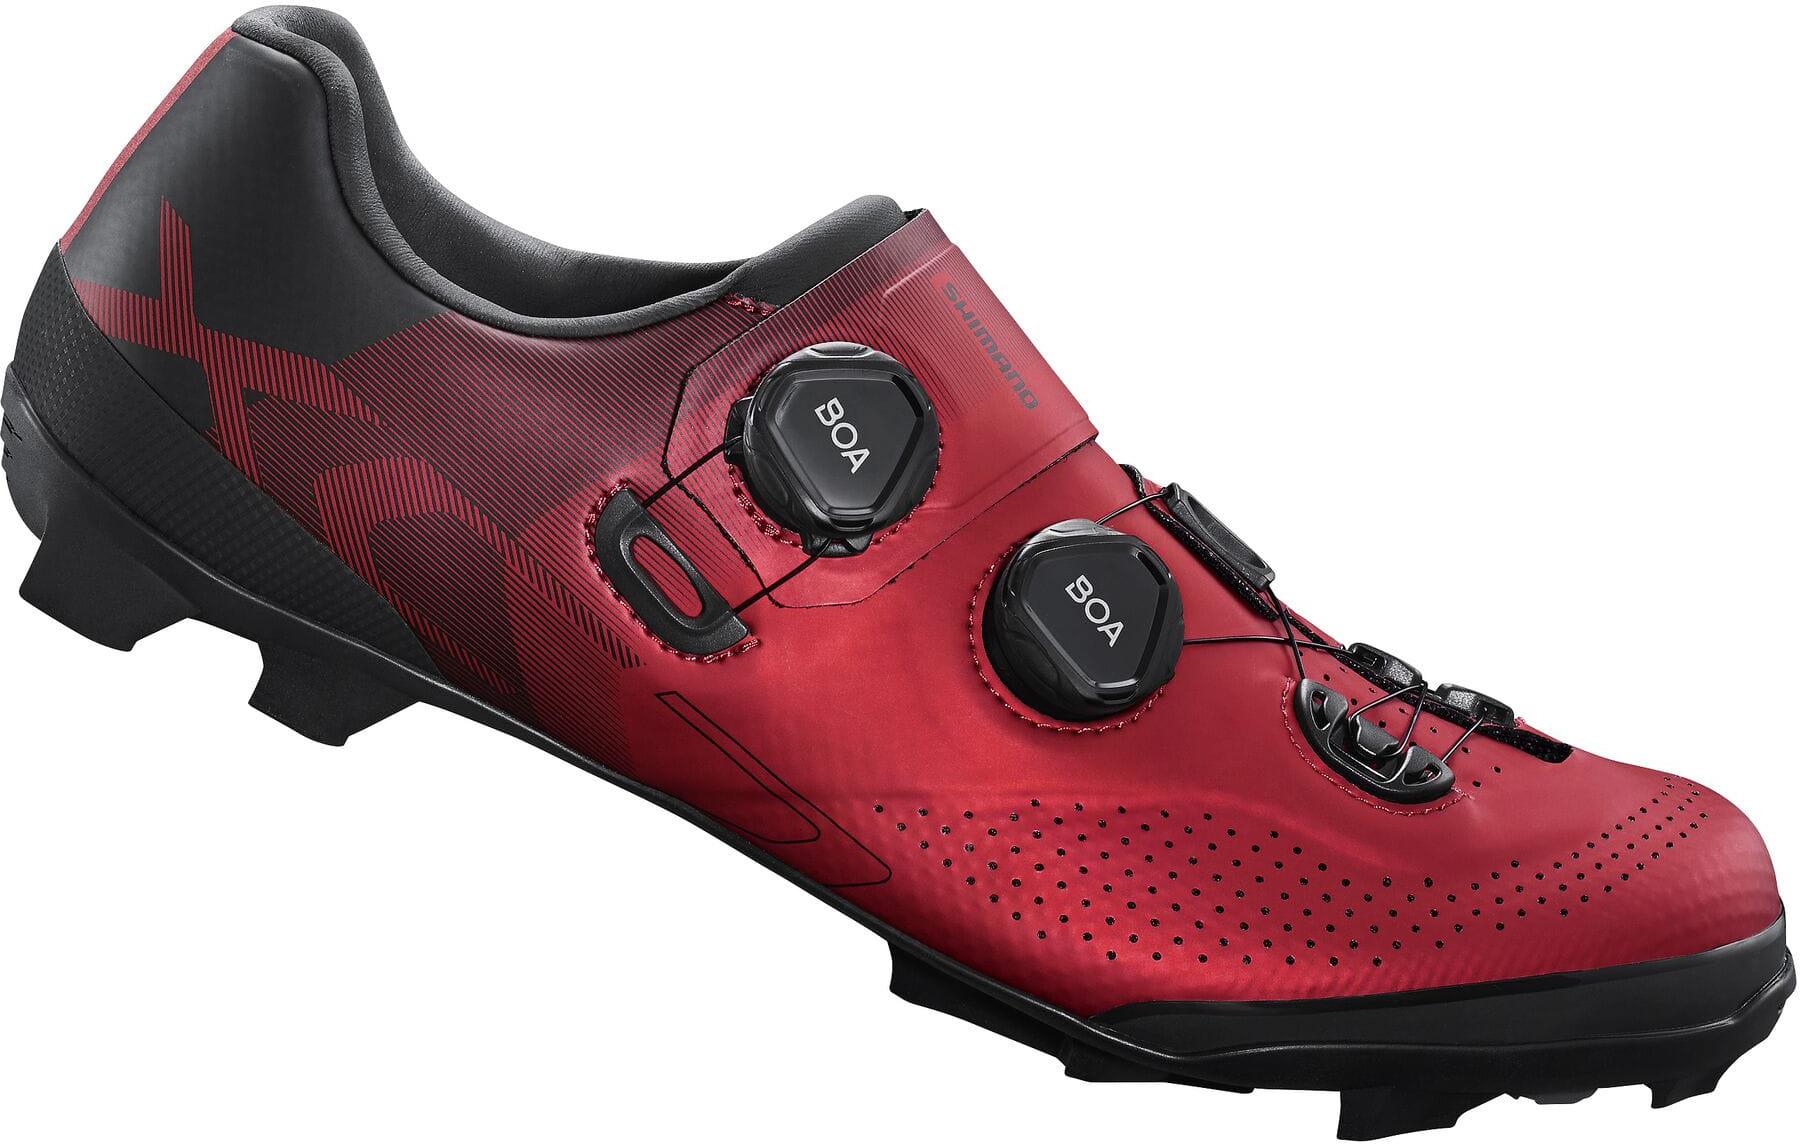 Shimano Xc7 Carbon Mtb Spd Shoes (xc702) - Red